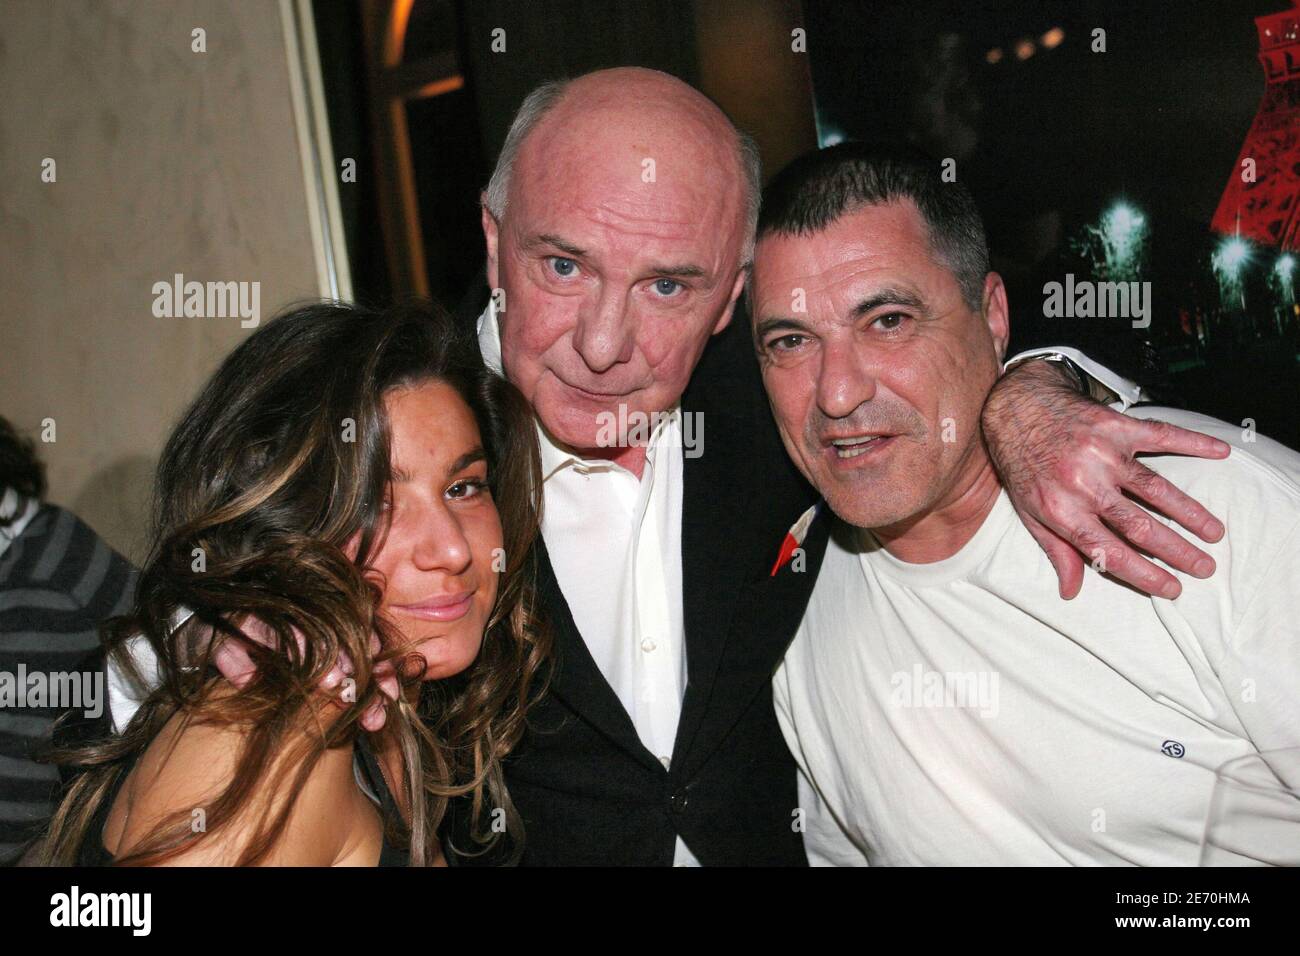 EXCLUSIVE. French Humorists Bezu and Jean-Marie Bigard during the 'Epiphany' party at L'Etoile Club in Paris, France, on January 8, 2007. Photo by Benoit Pinguet/ABACAPRESS.COM Stock Photo